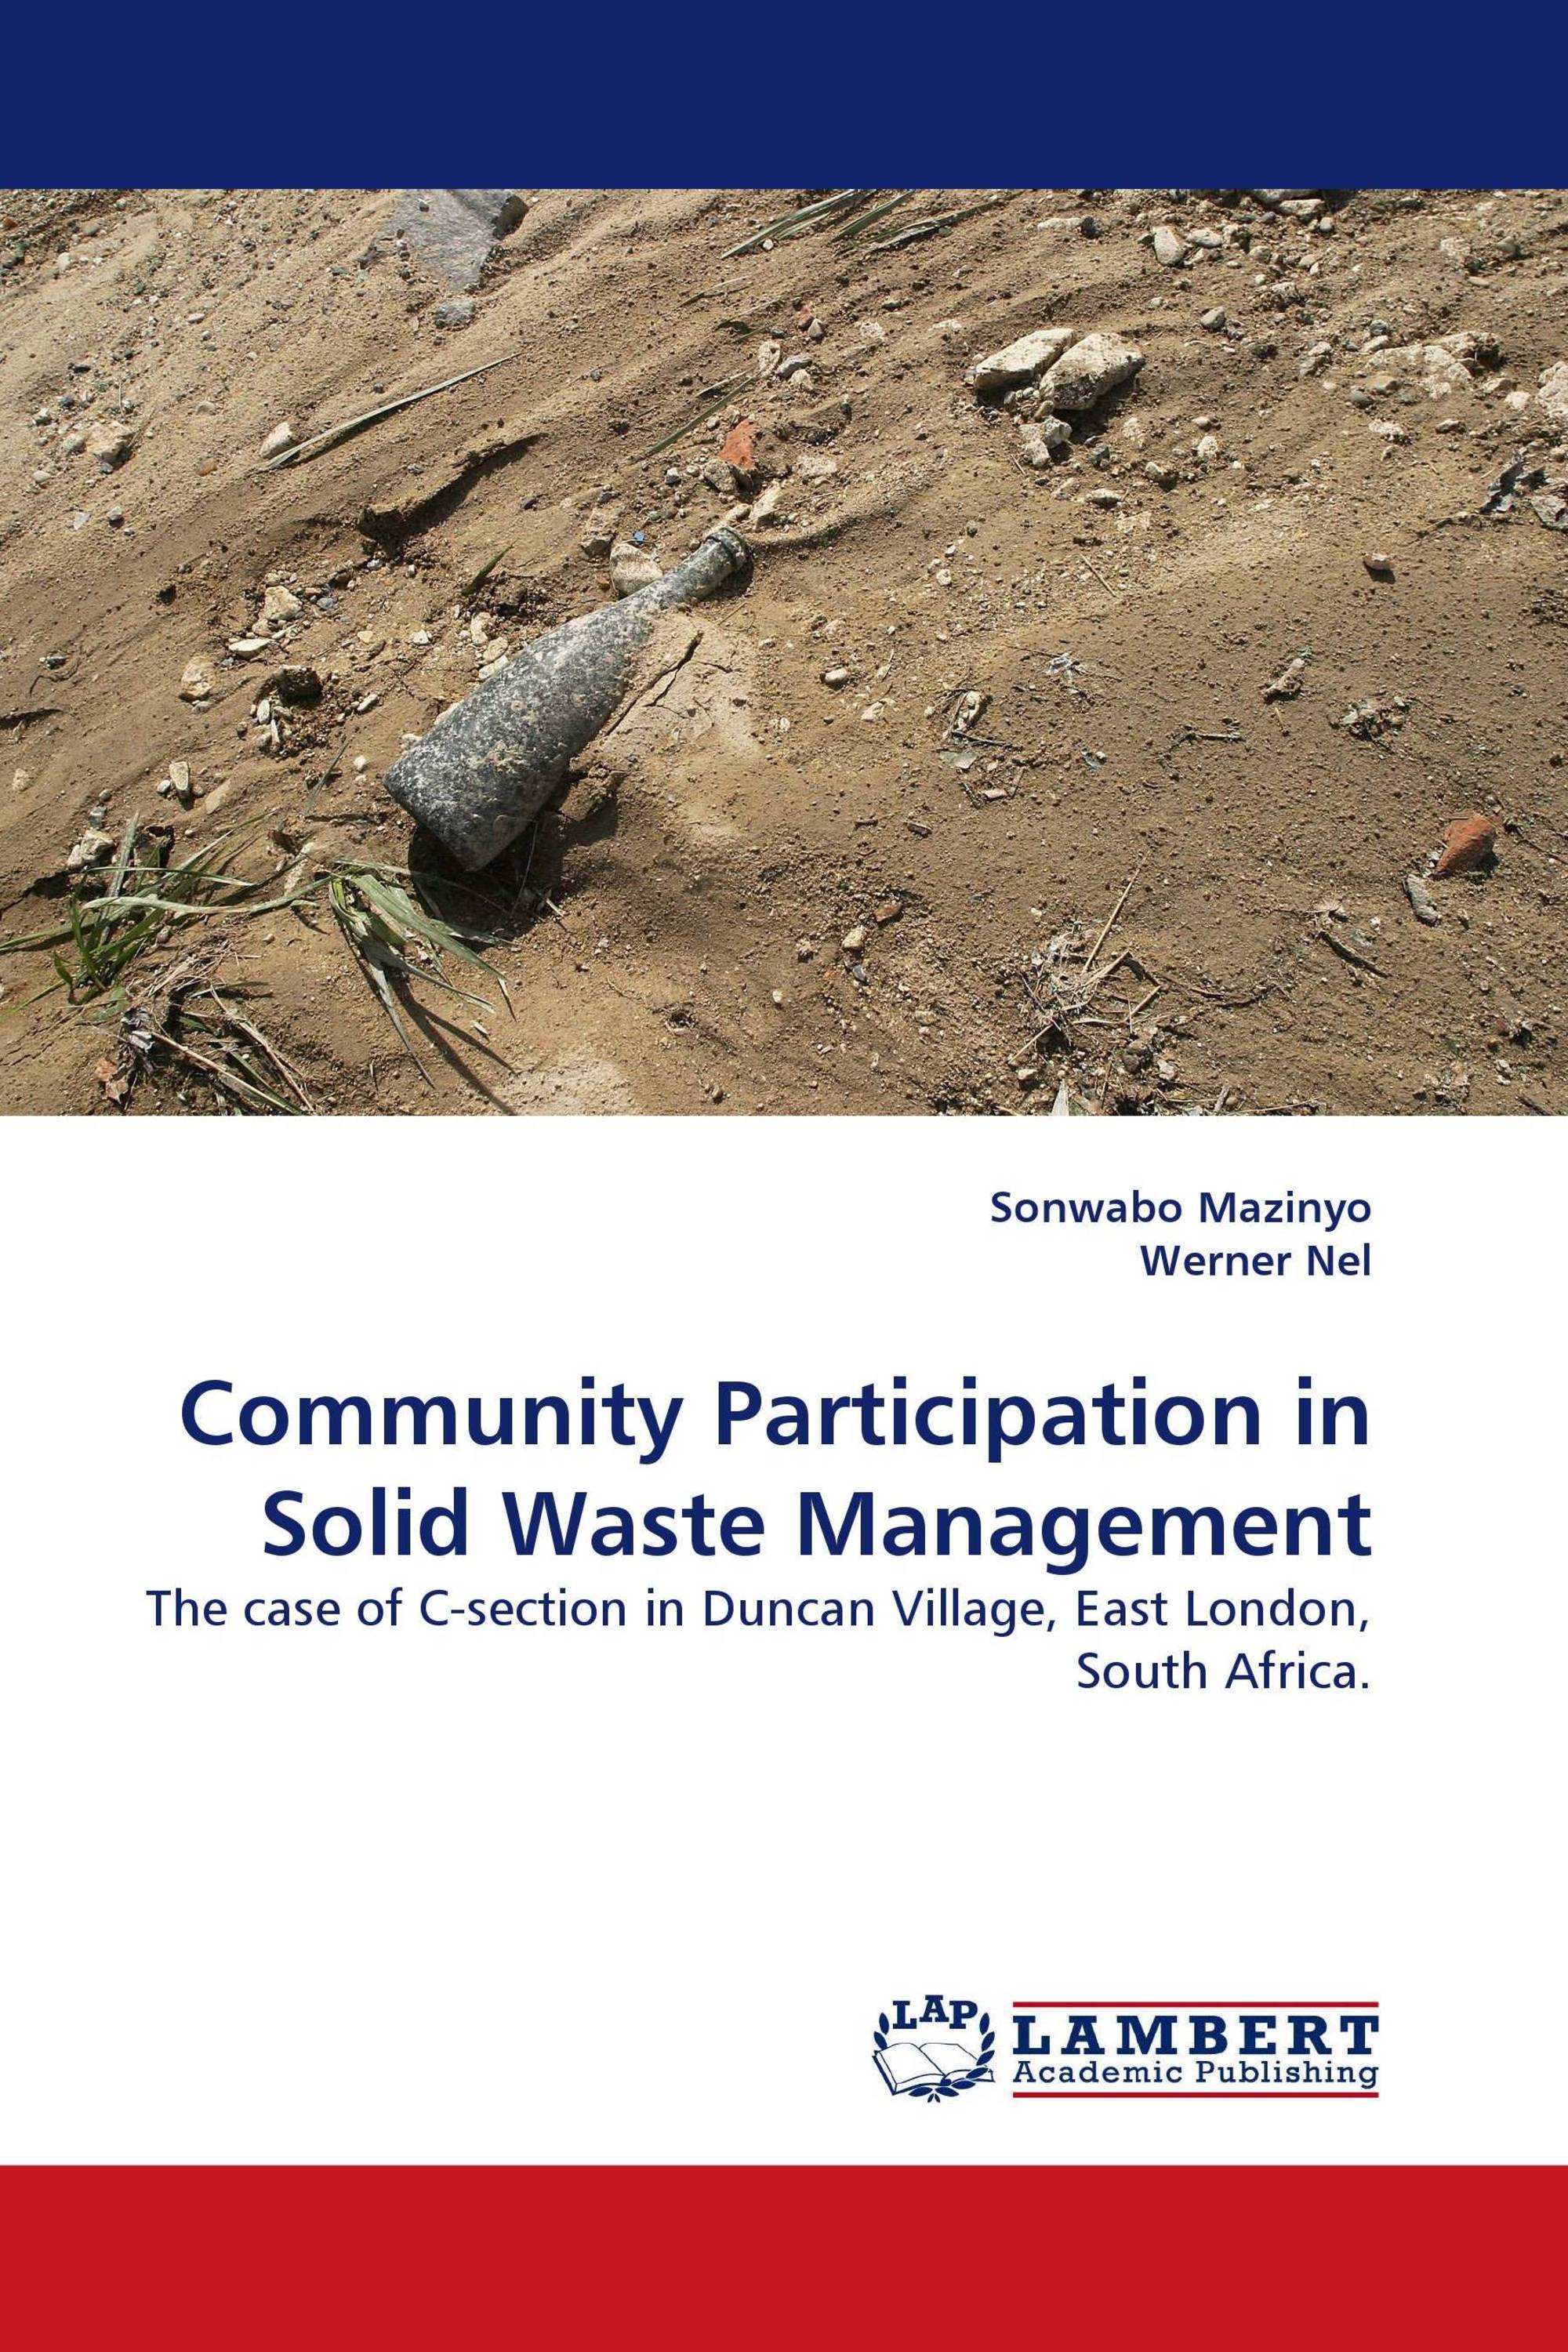 Community Participation in Solid Waste Management